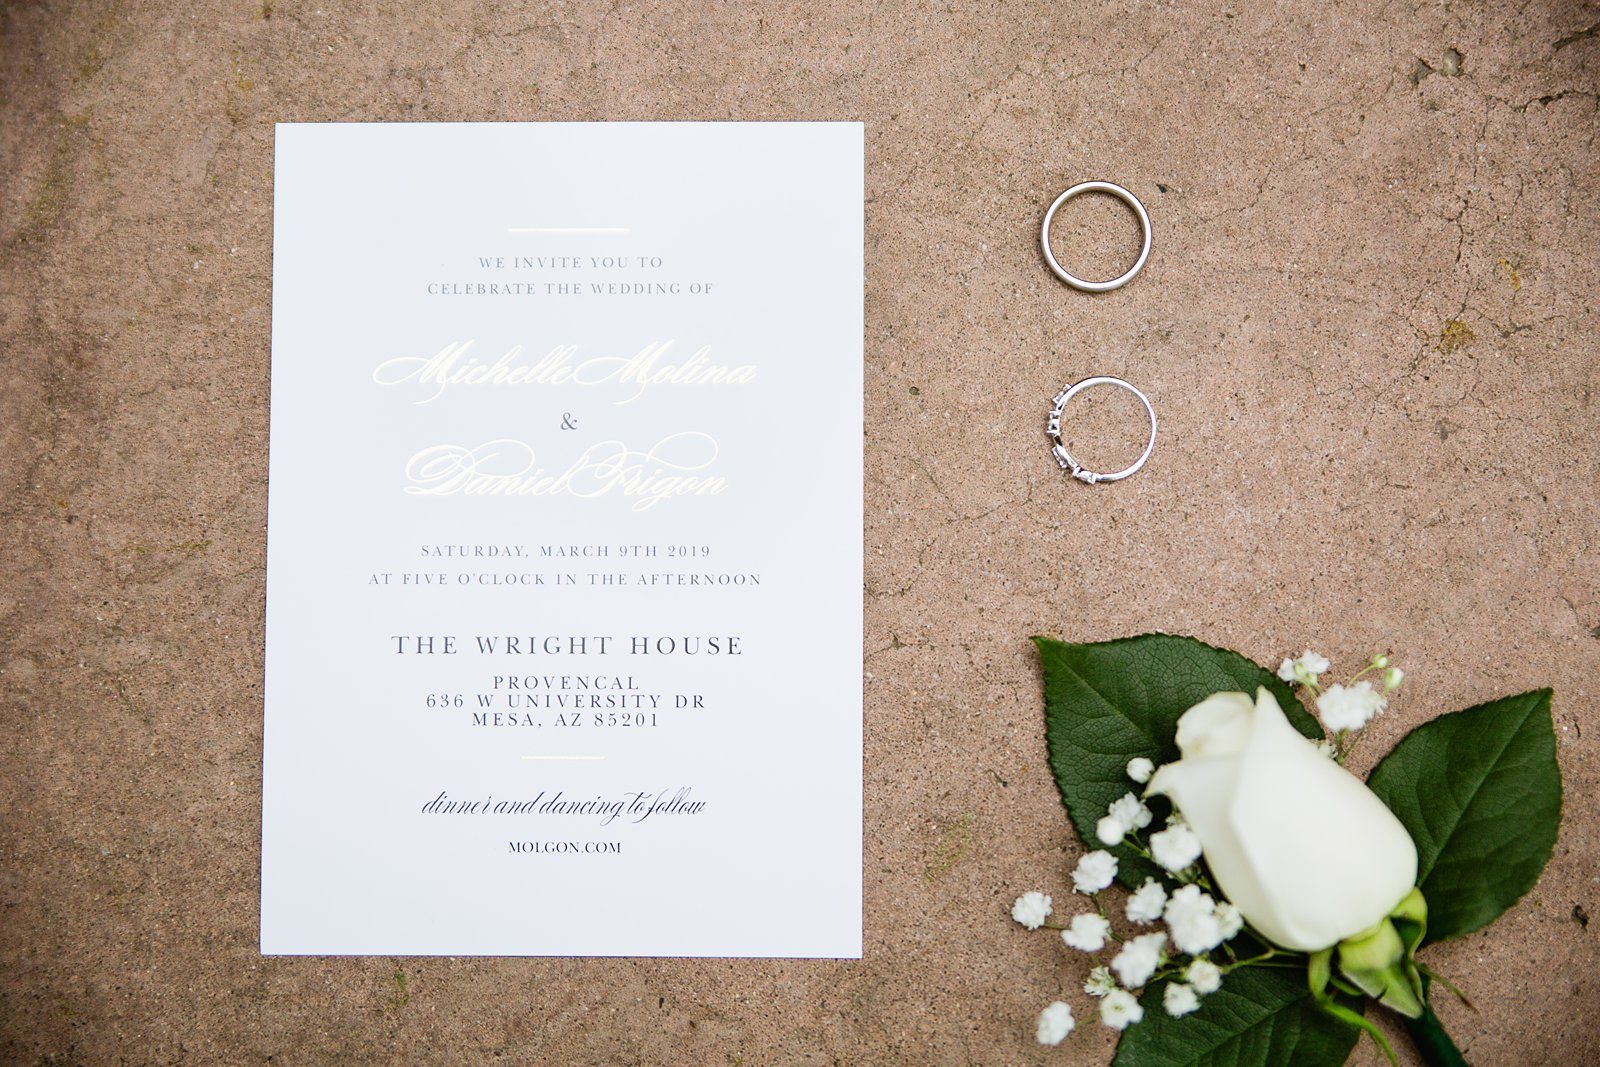 Simple classic wedding invitations with classic rose boutonniere and wedding rings by PMA Photography.